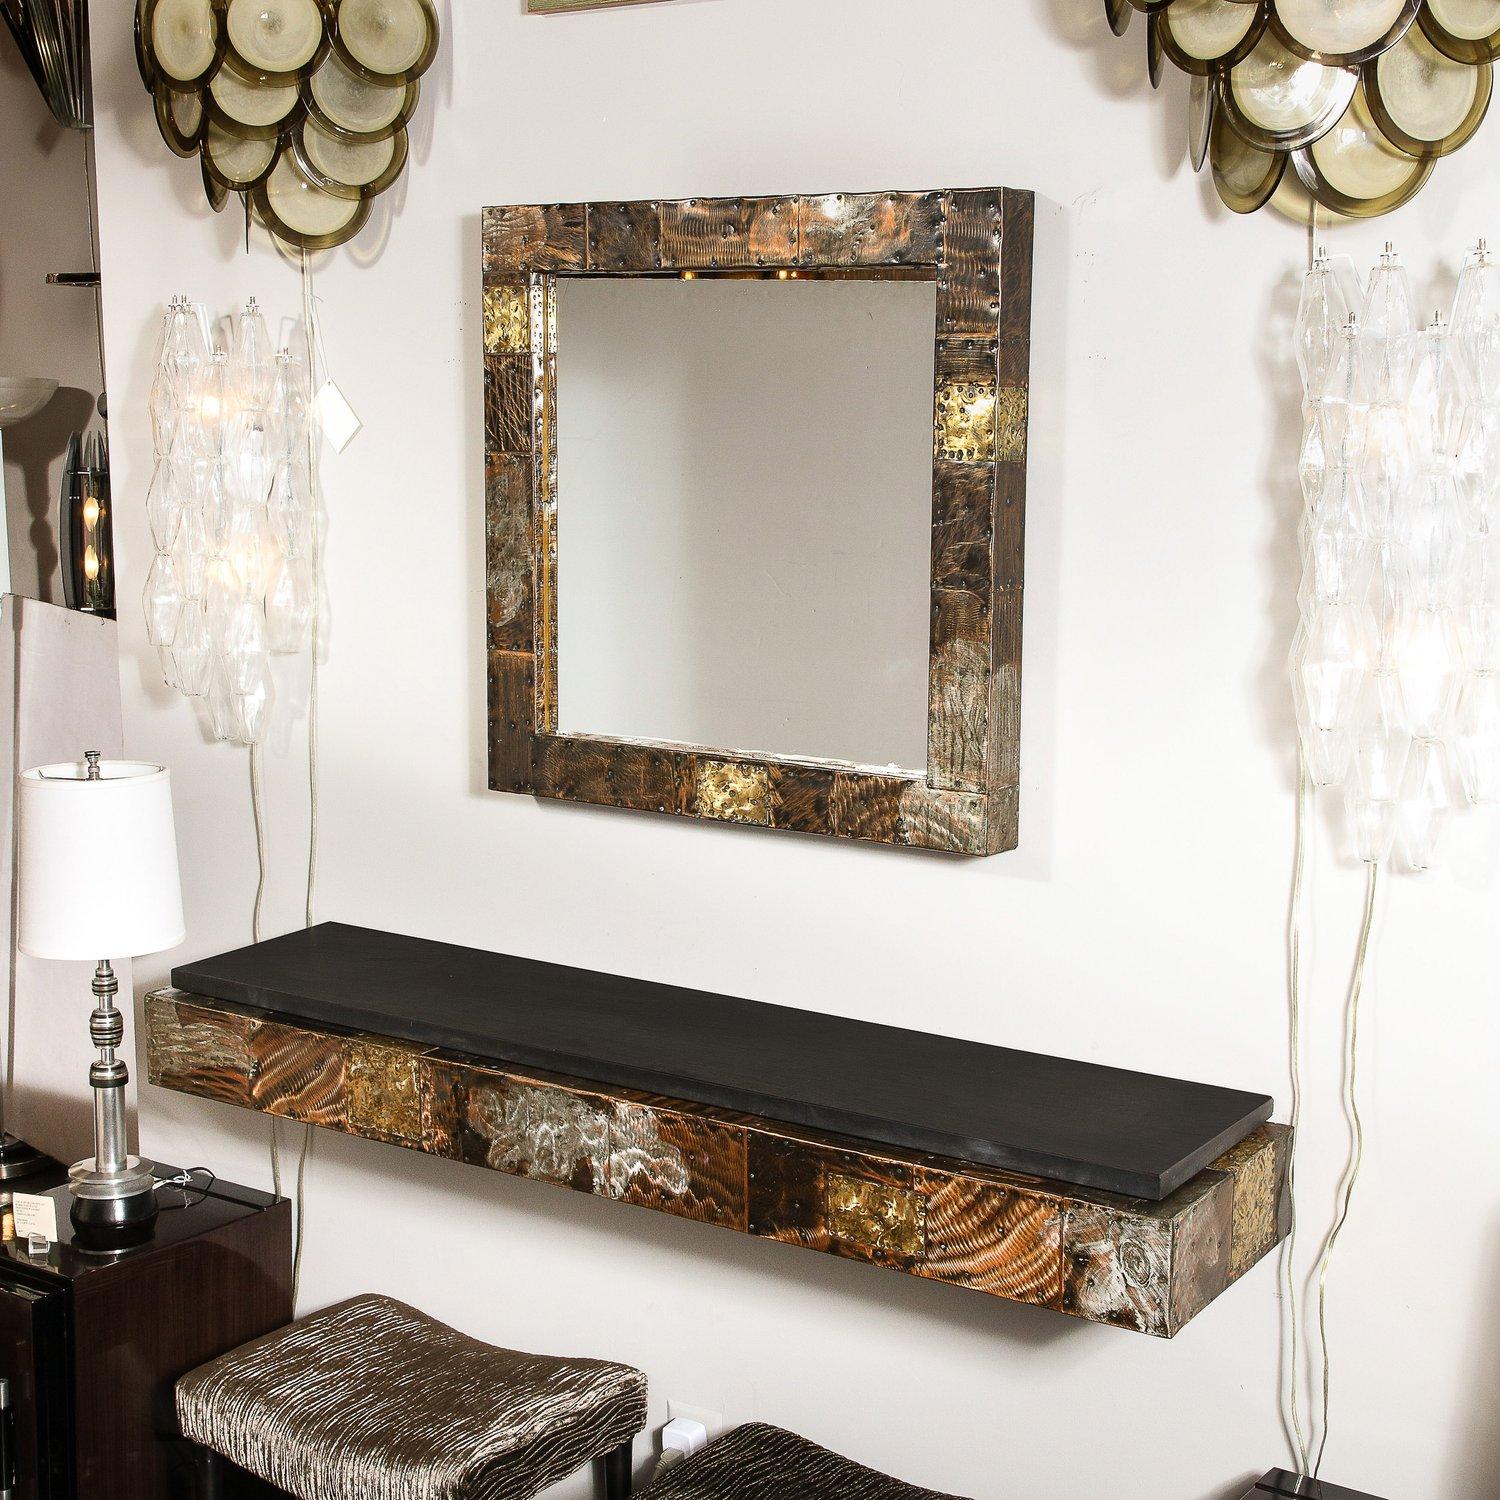 American Mid-Century Brutalist Patchwork Mirror and Wall Mounted Console by Paul Evans For Sale